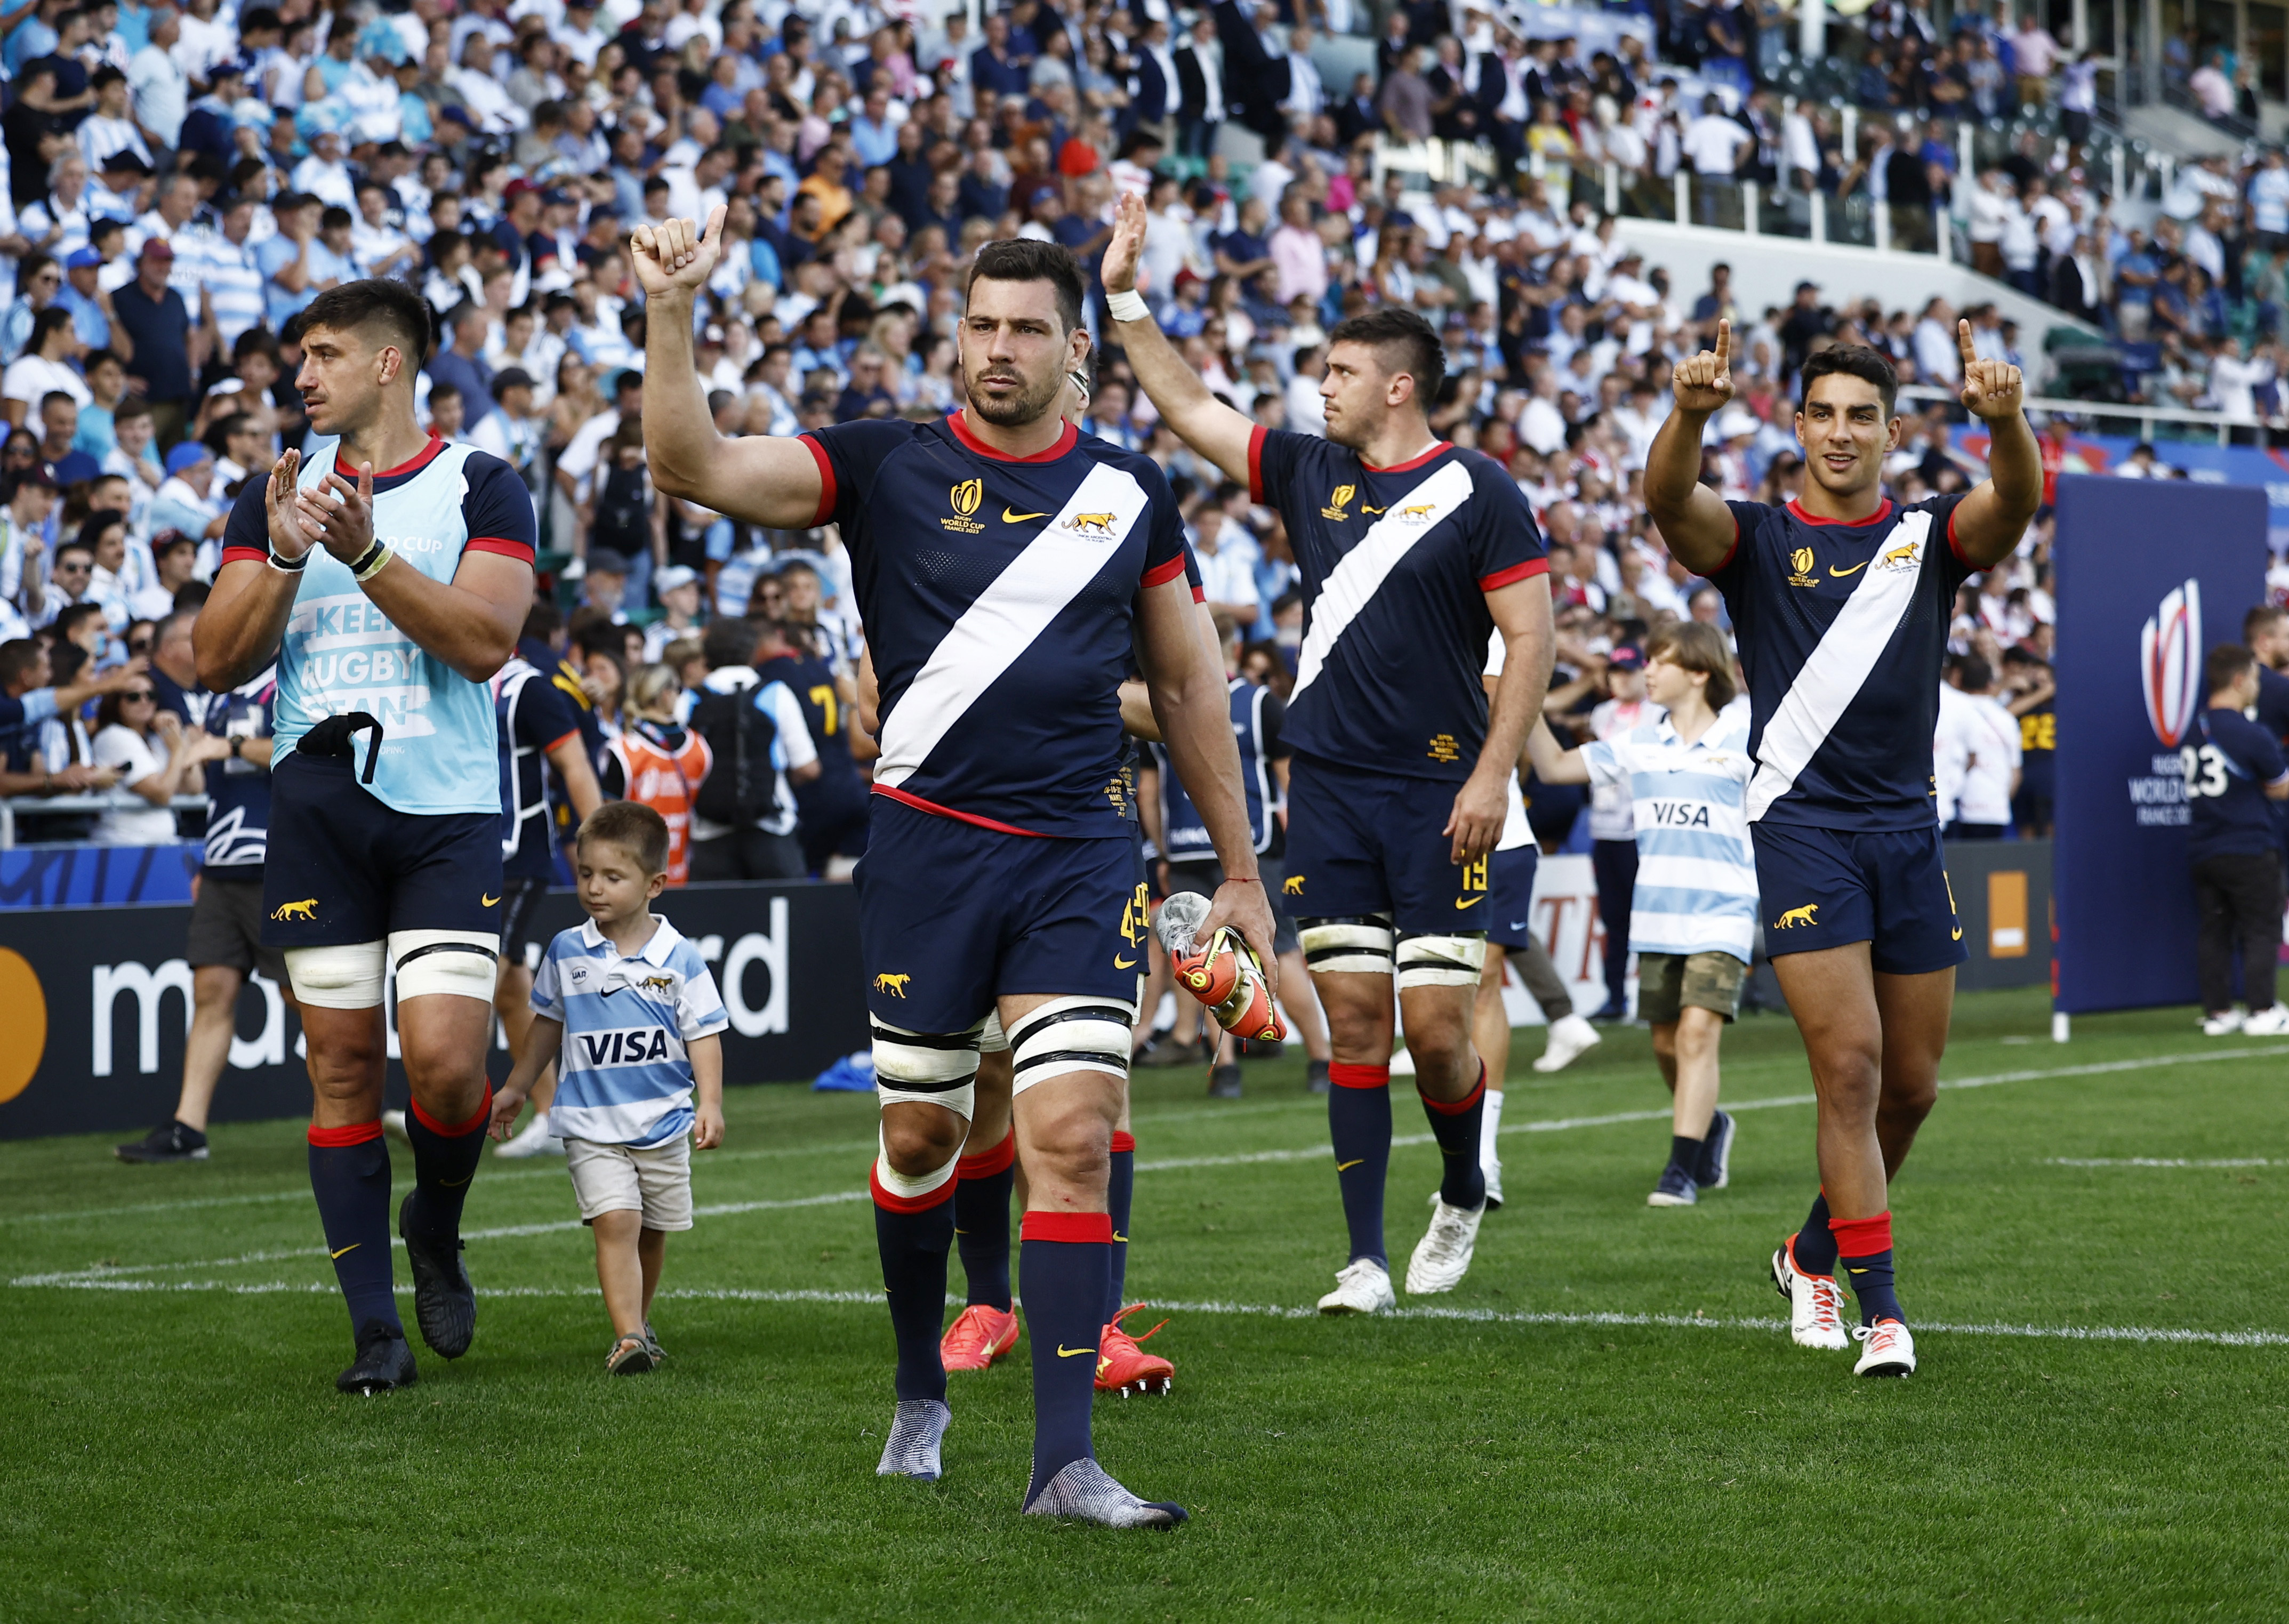 France beat Argentina 39-22 in rugby friendly